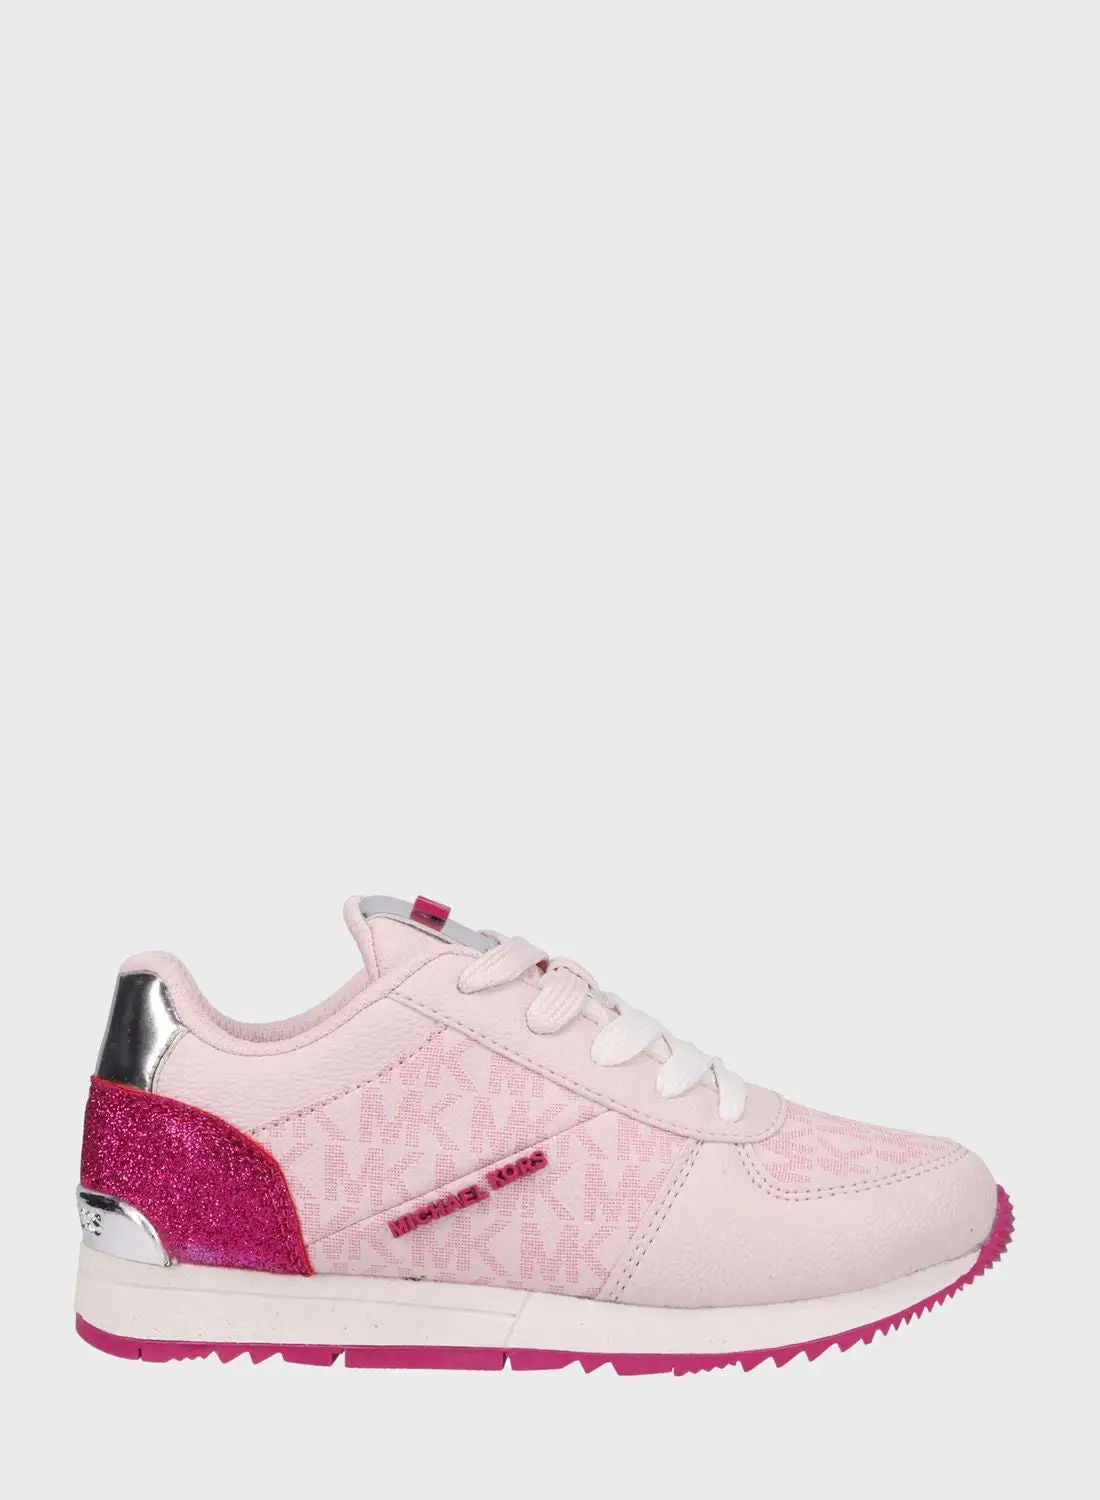 Michael Kors Youth Allie Jogger Sneakers